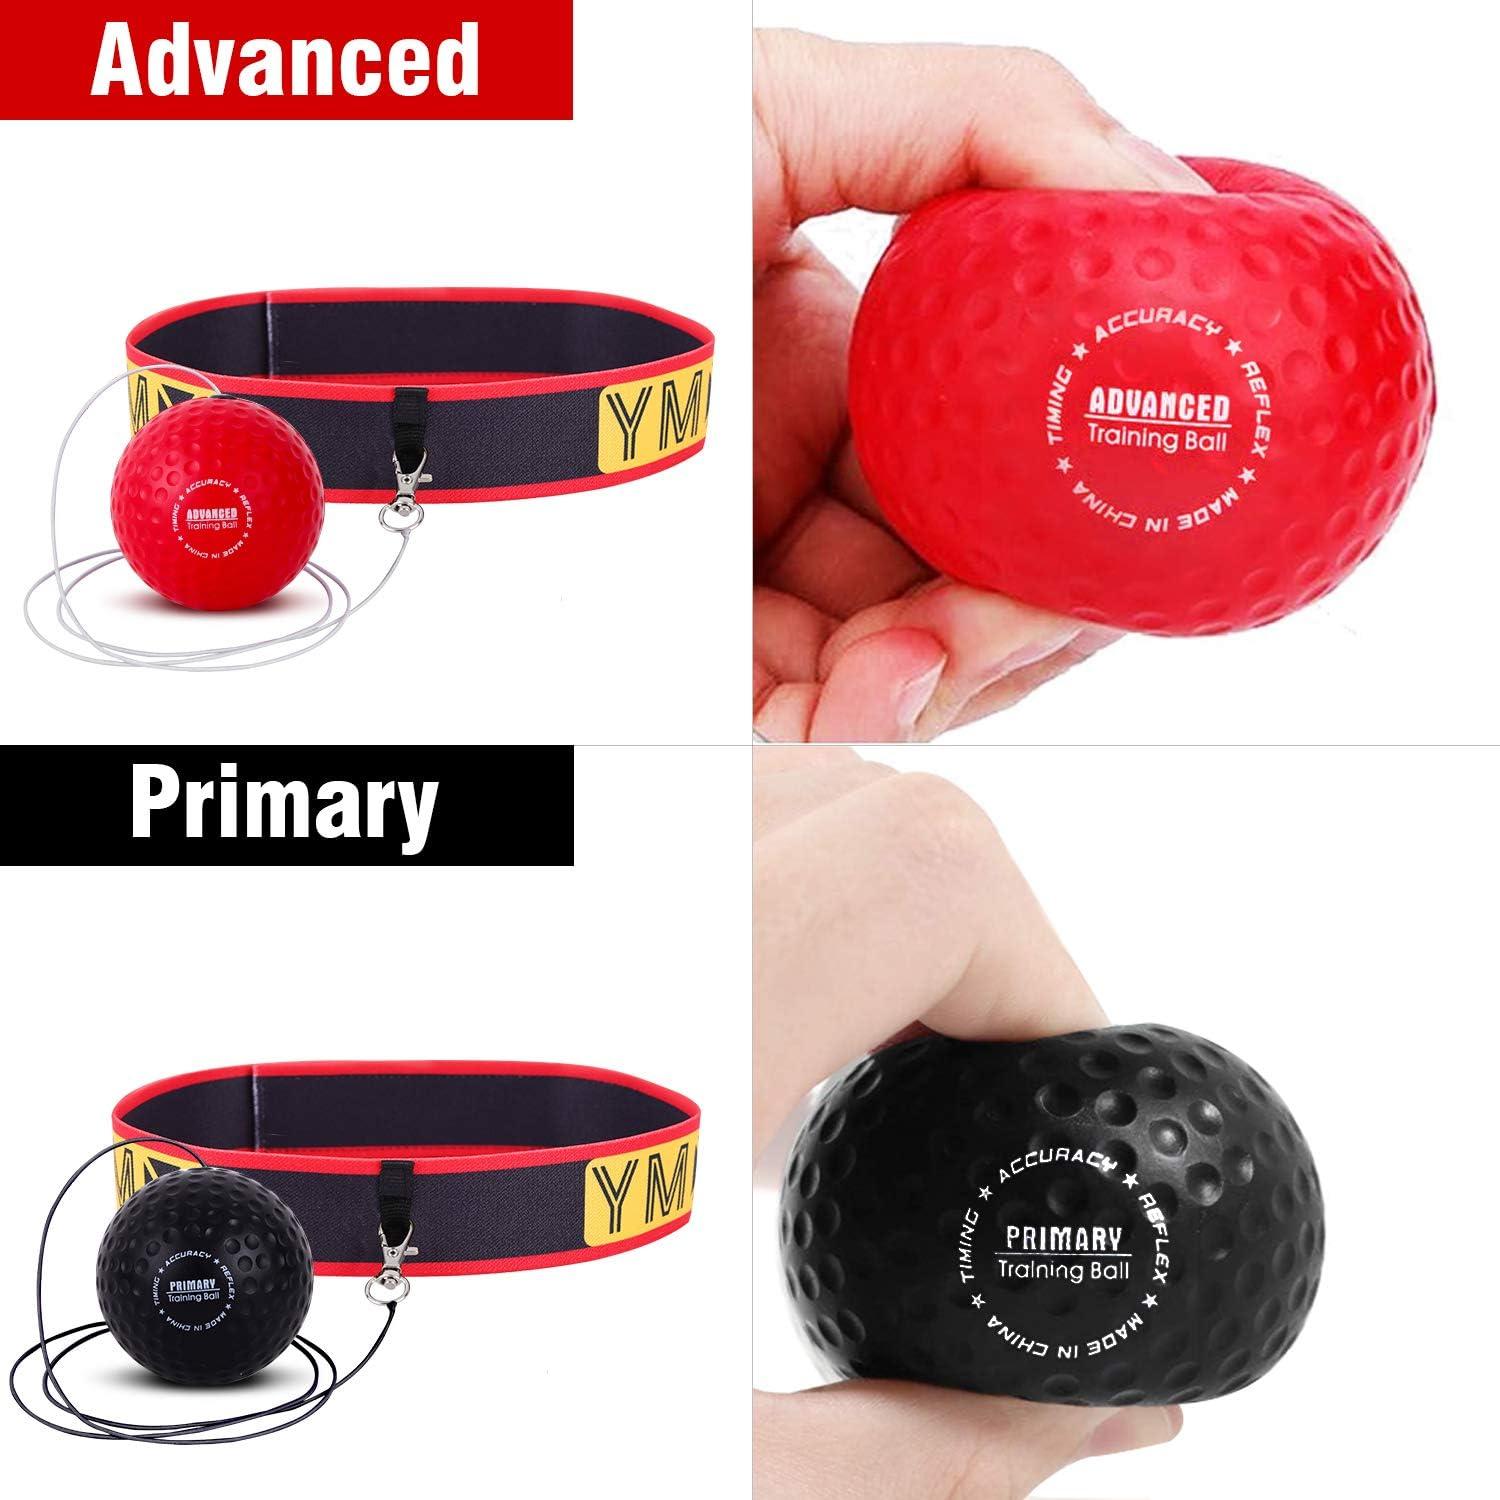 YMX BOXING Training Reflex Ball - Adjustable Elastic Head Band, Light  Weight Soft Foam Balls - Improve Hand to Eye Coordination, Reaction Speed,  Focus, Accuracy - Cardio Sports Exercise Equipment, Boxing Gym